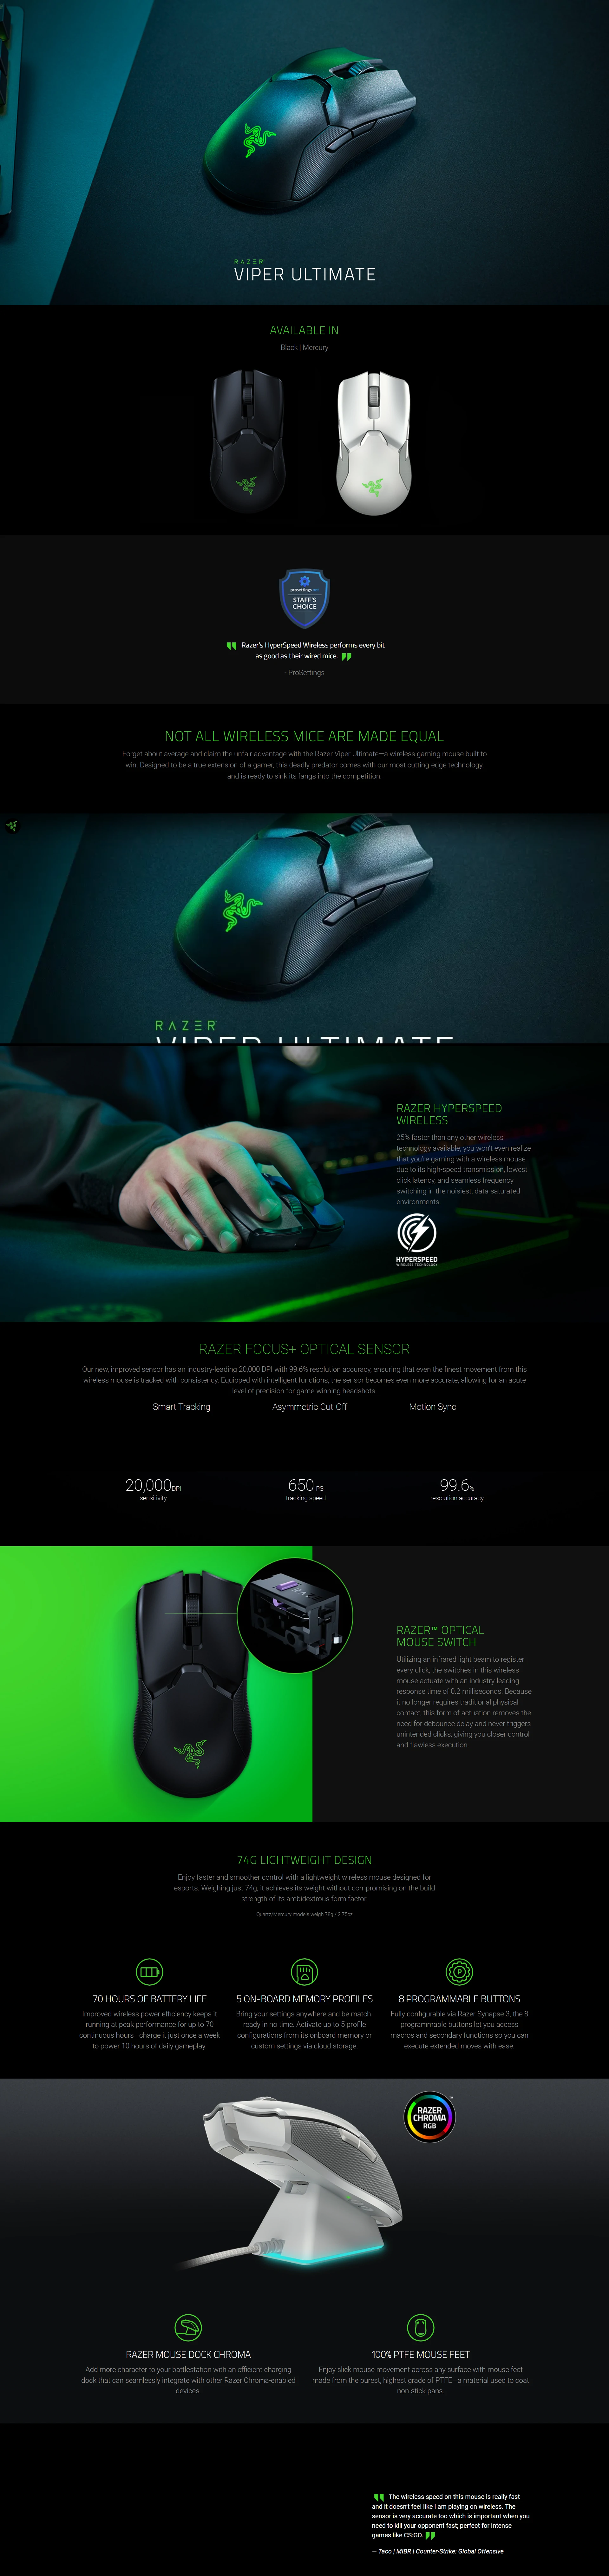 Overview - Razer Viper Ultimate Ambidextrous Gaming Mouse with Razer HyperSpeed Wireless Charging Dock